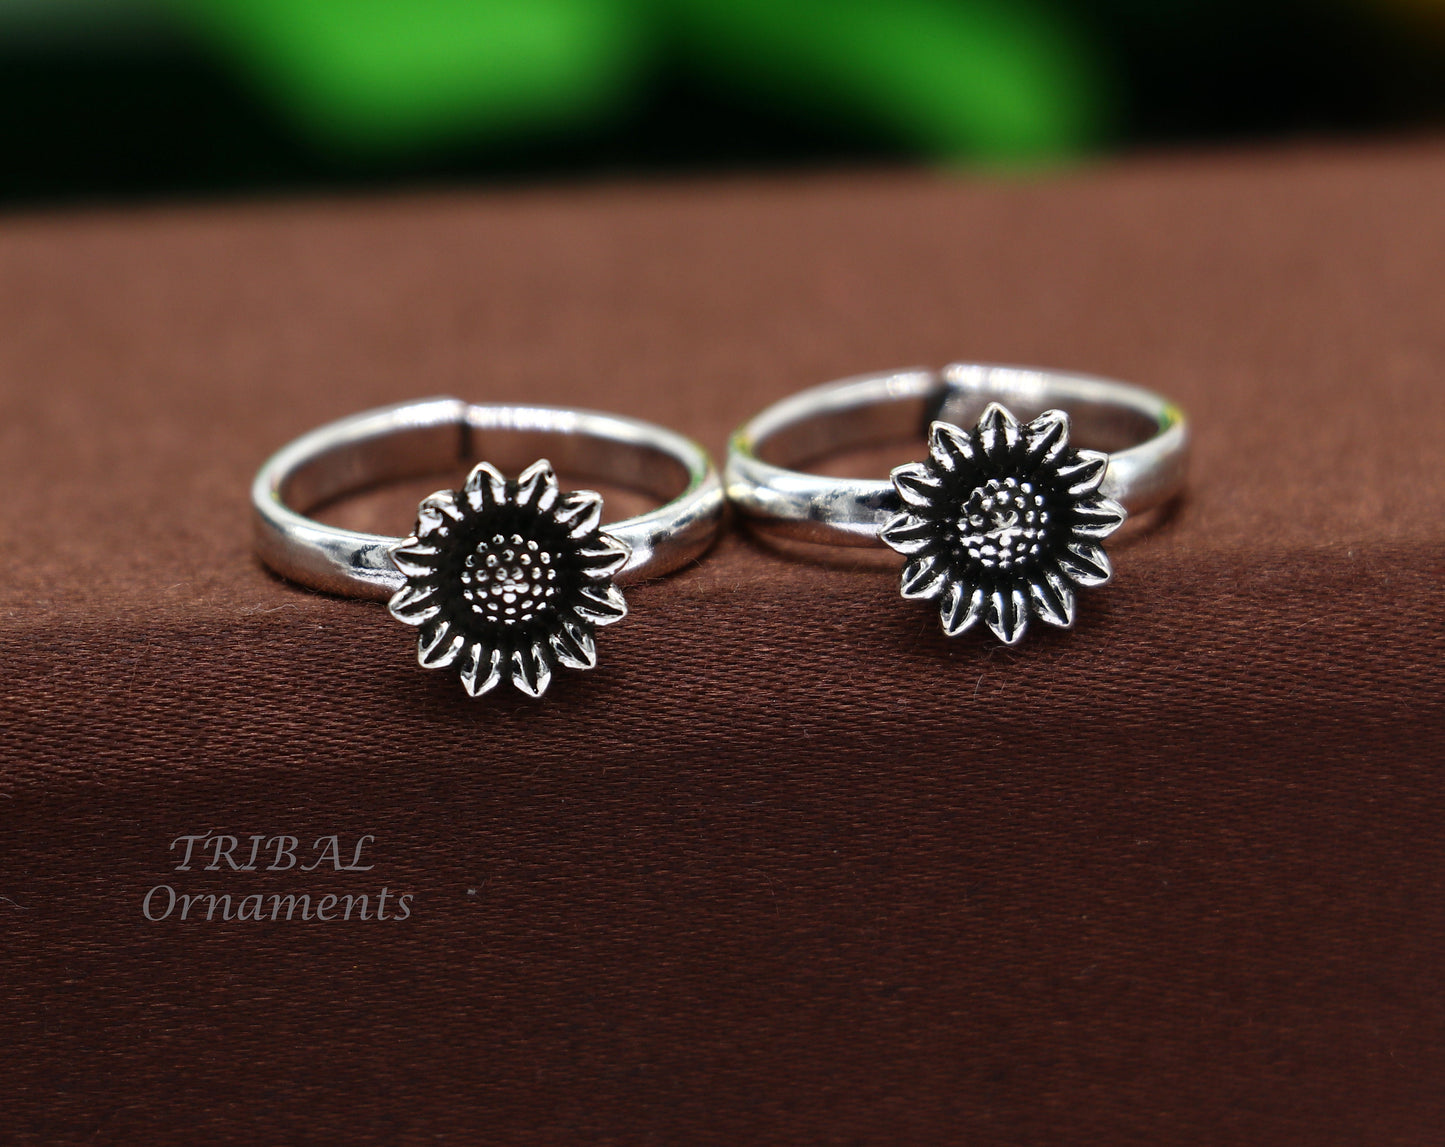 925 sterling silver elegant floral design handmade toe ring, toe band stylish modern women's brides jewelry, india traditional jewelry ytr43 - TRIBAL ORNAMENTS